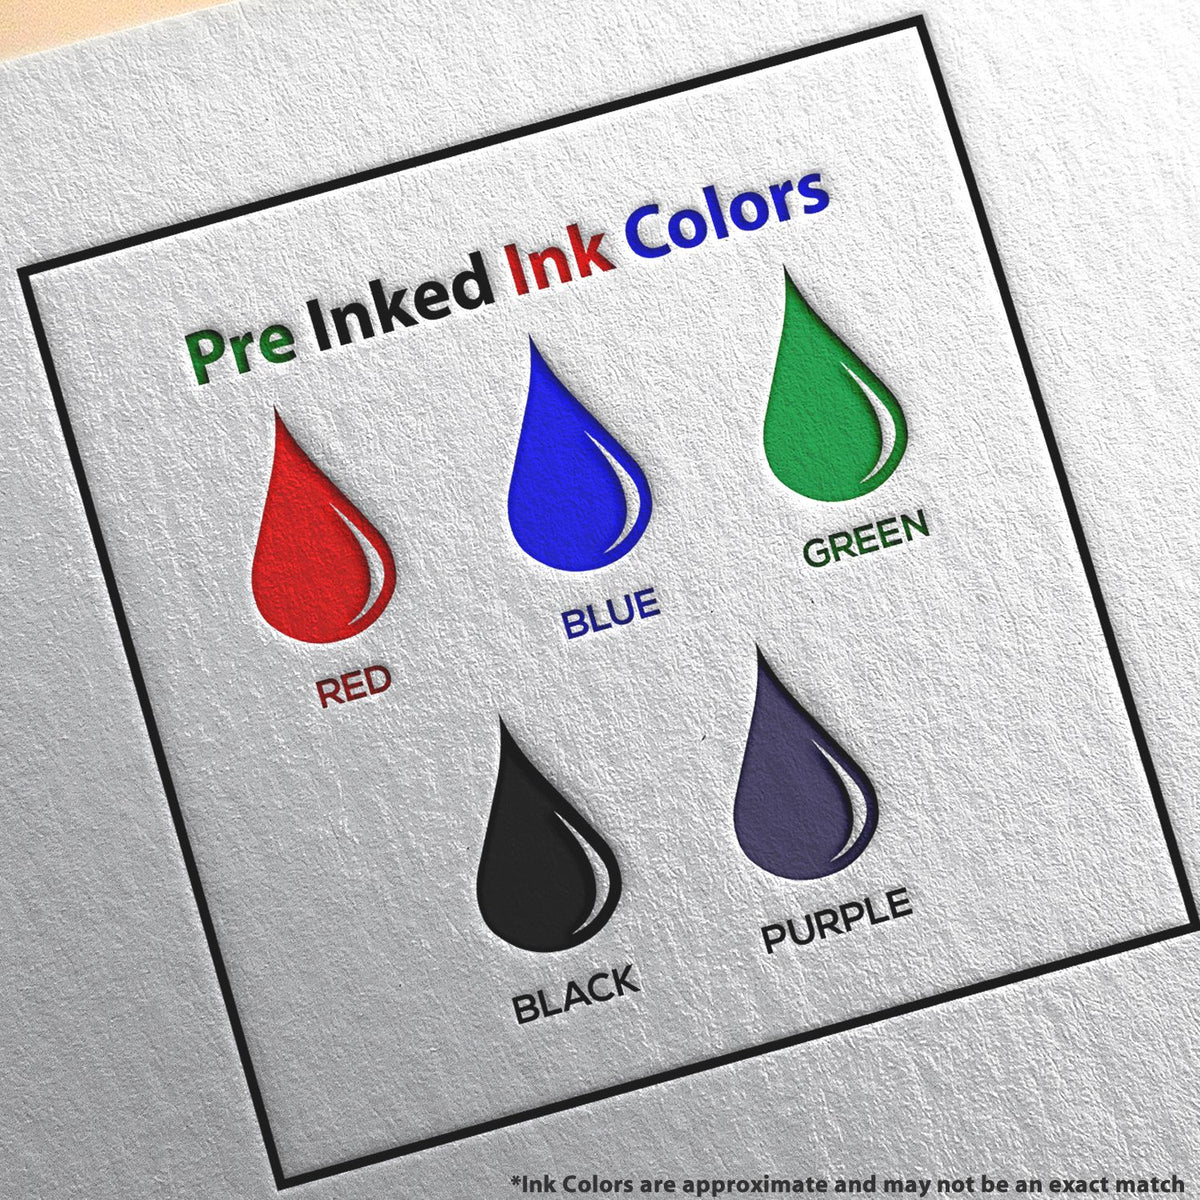 A picture showing the different ink colors or hues available for the Slim Pre-Inked Alabama Professional Engineer Seal Stamp product.